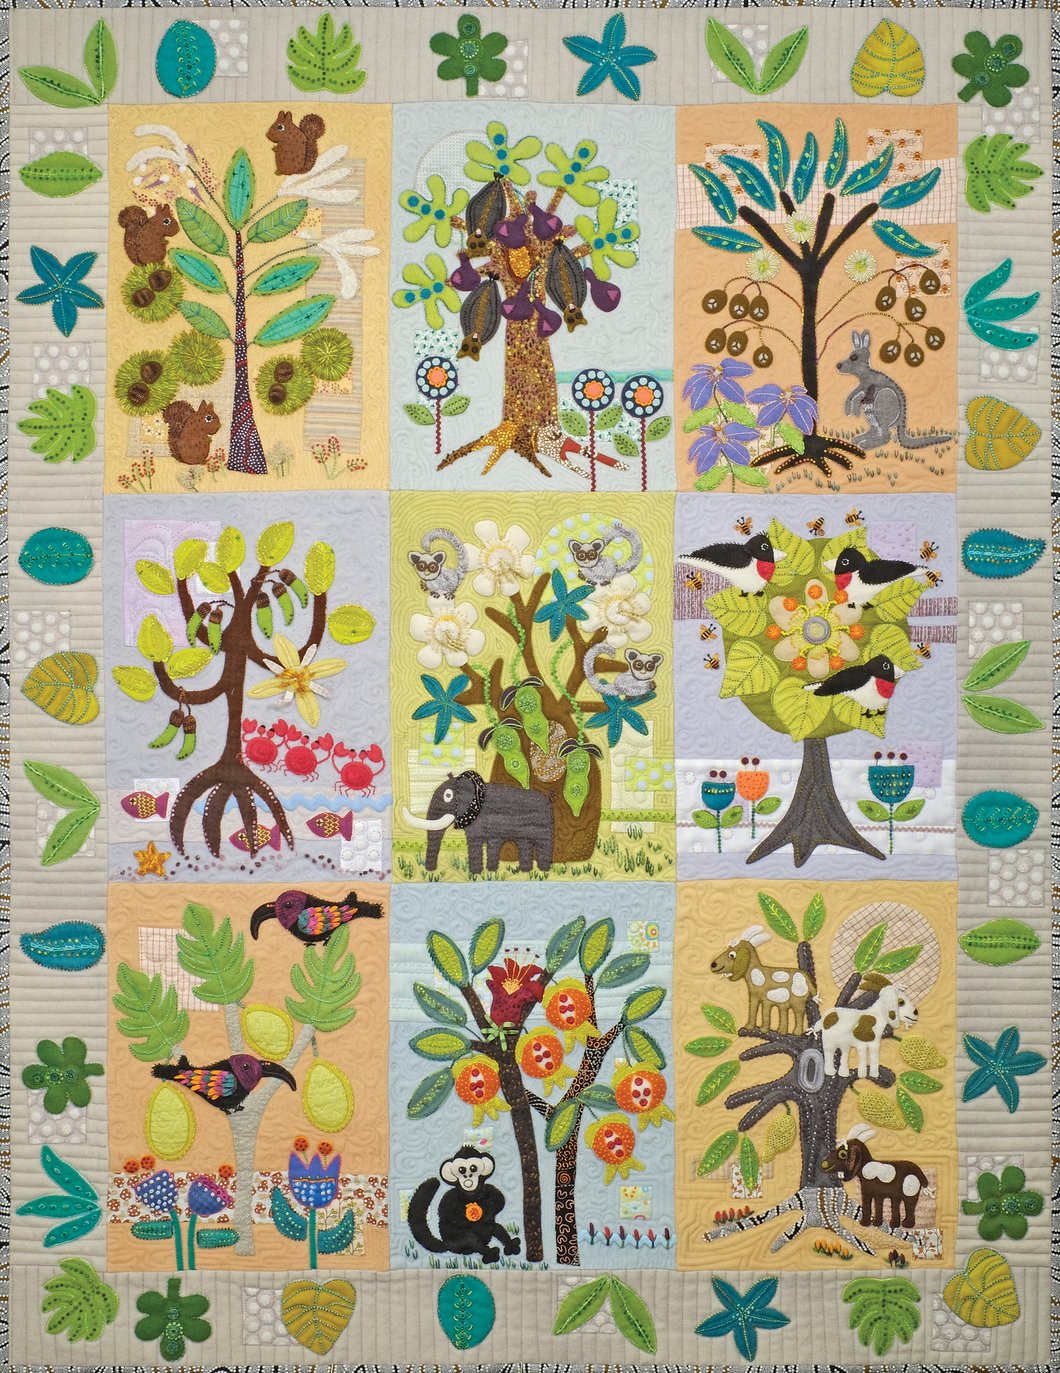 Forest For the Trees Book - Wool Felt Applique - Sue Spargo